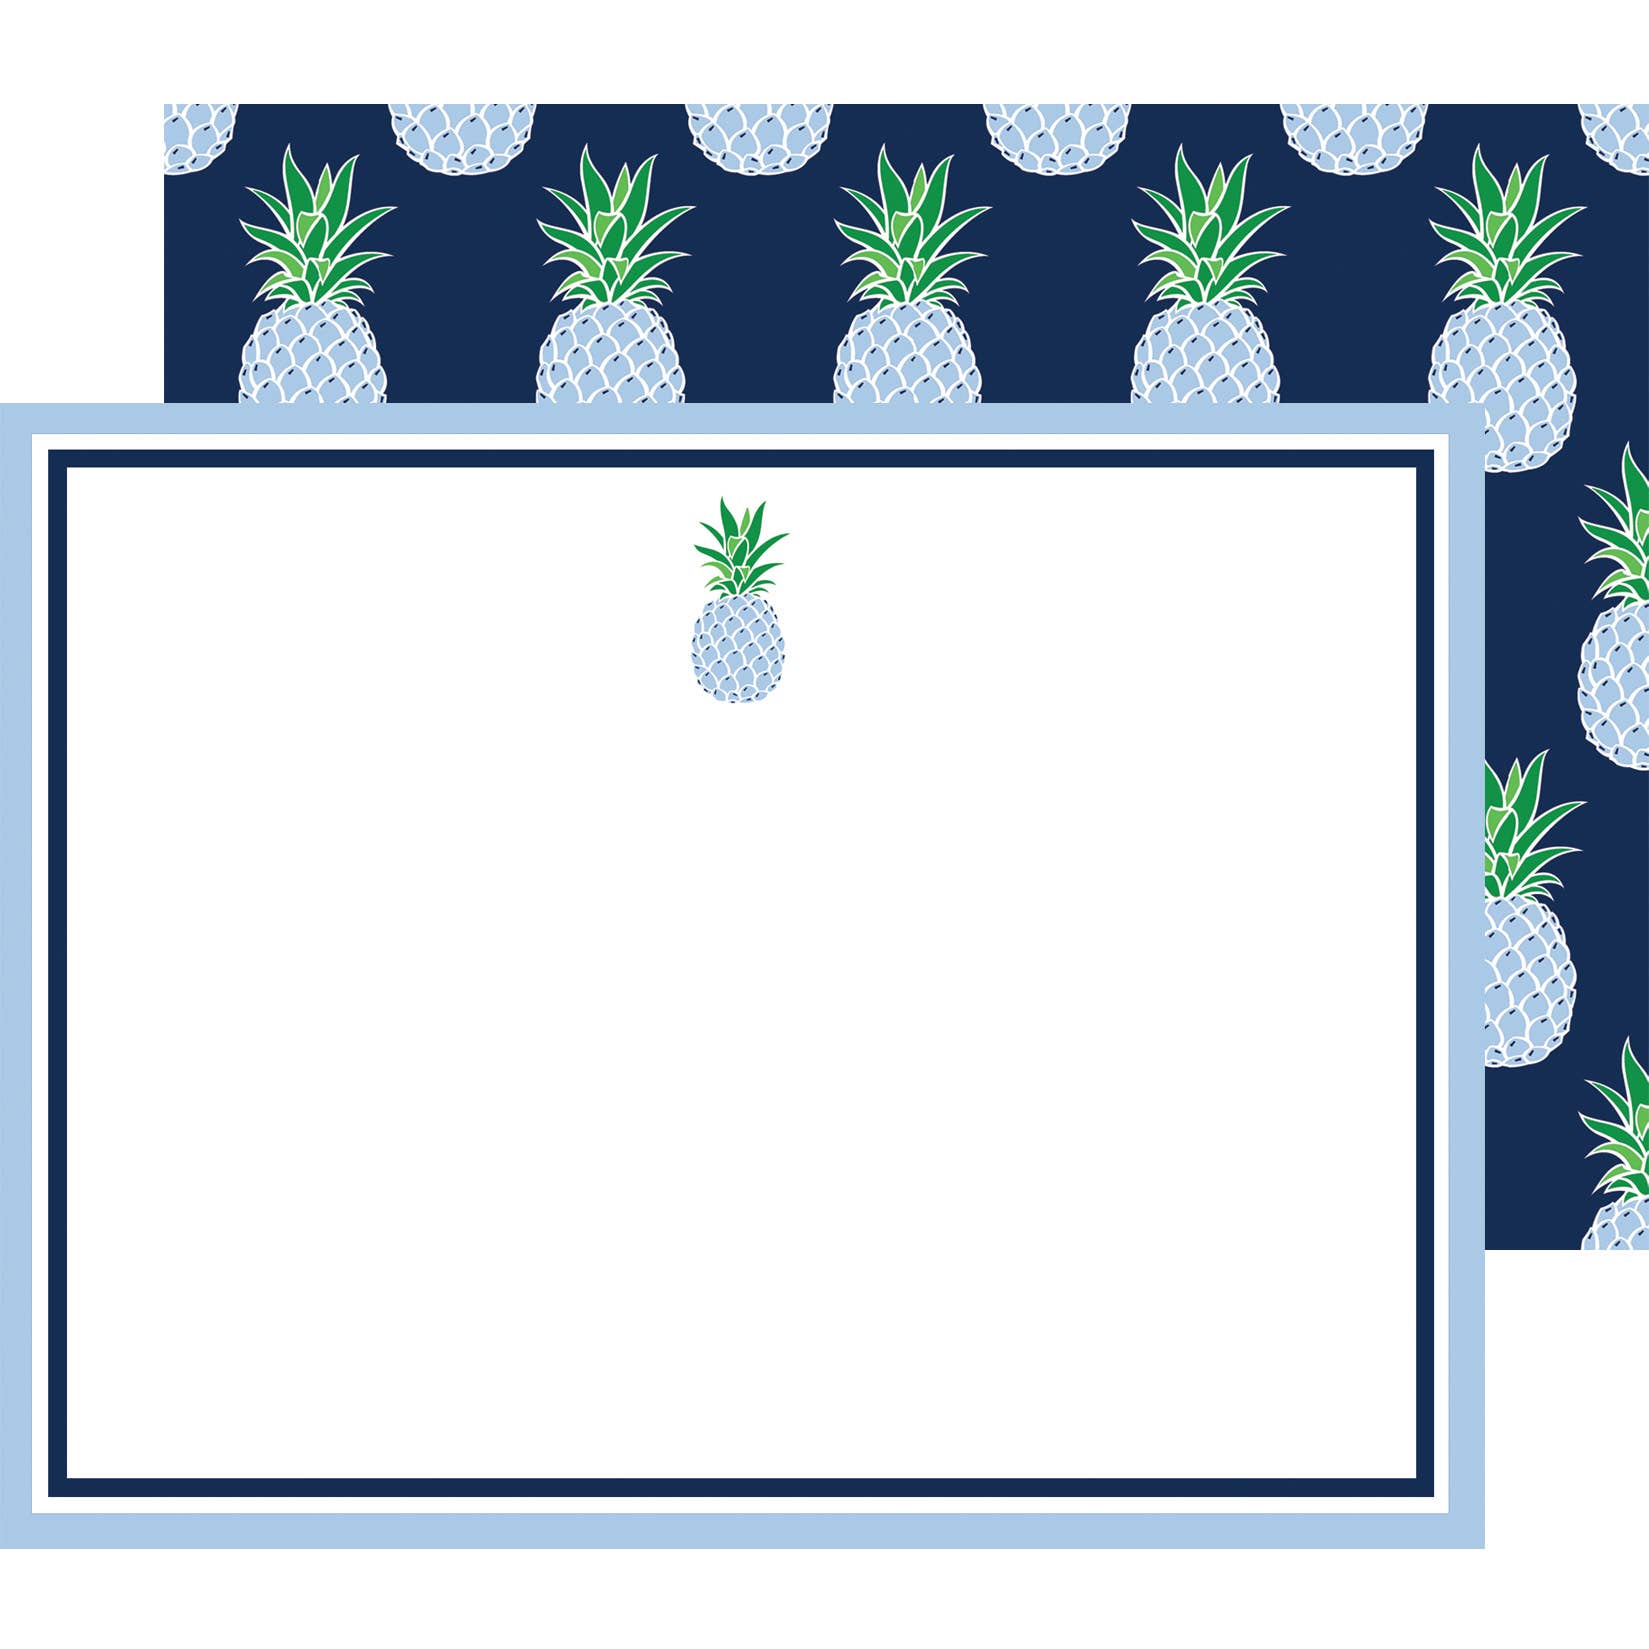 WH Hostess Social Stationery - Blue Pineapple Flat Notecards